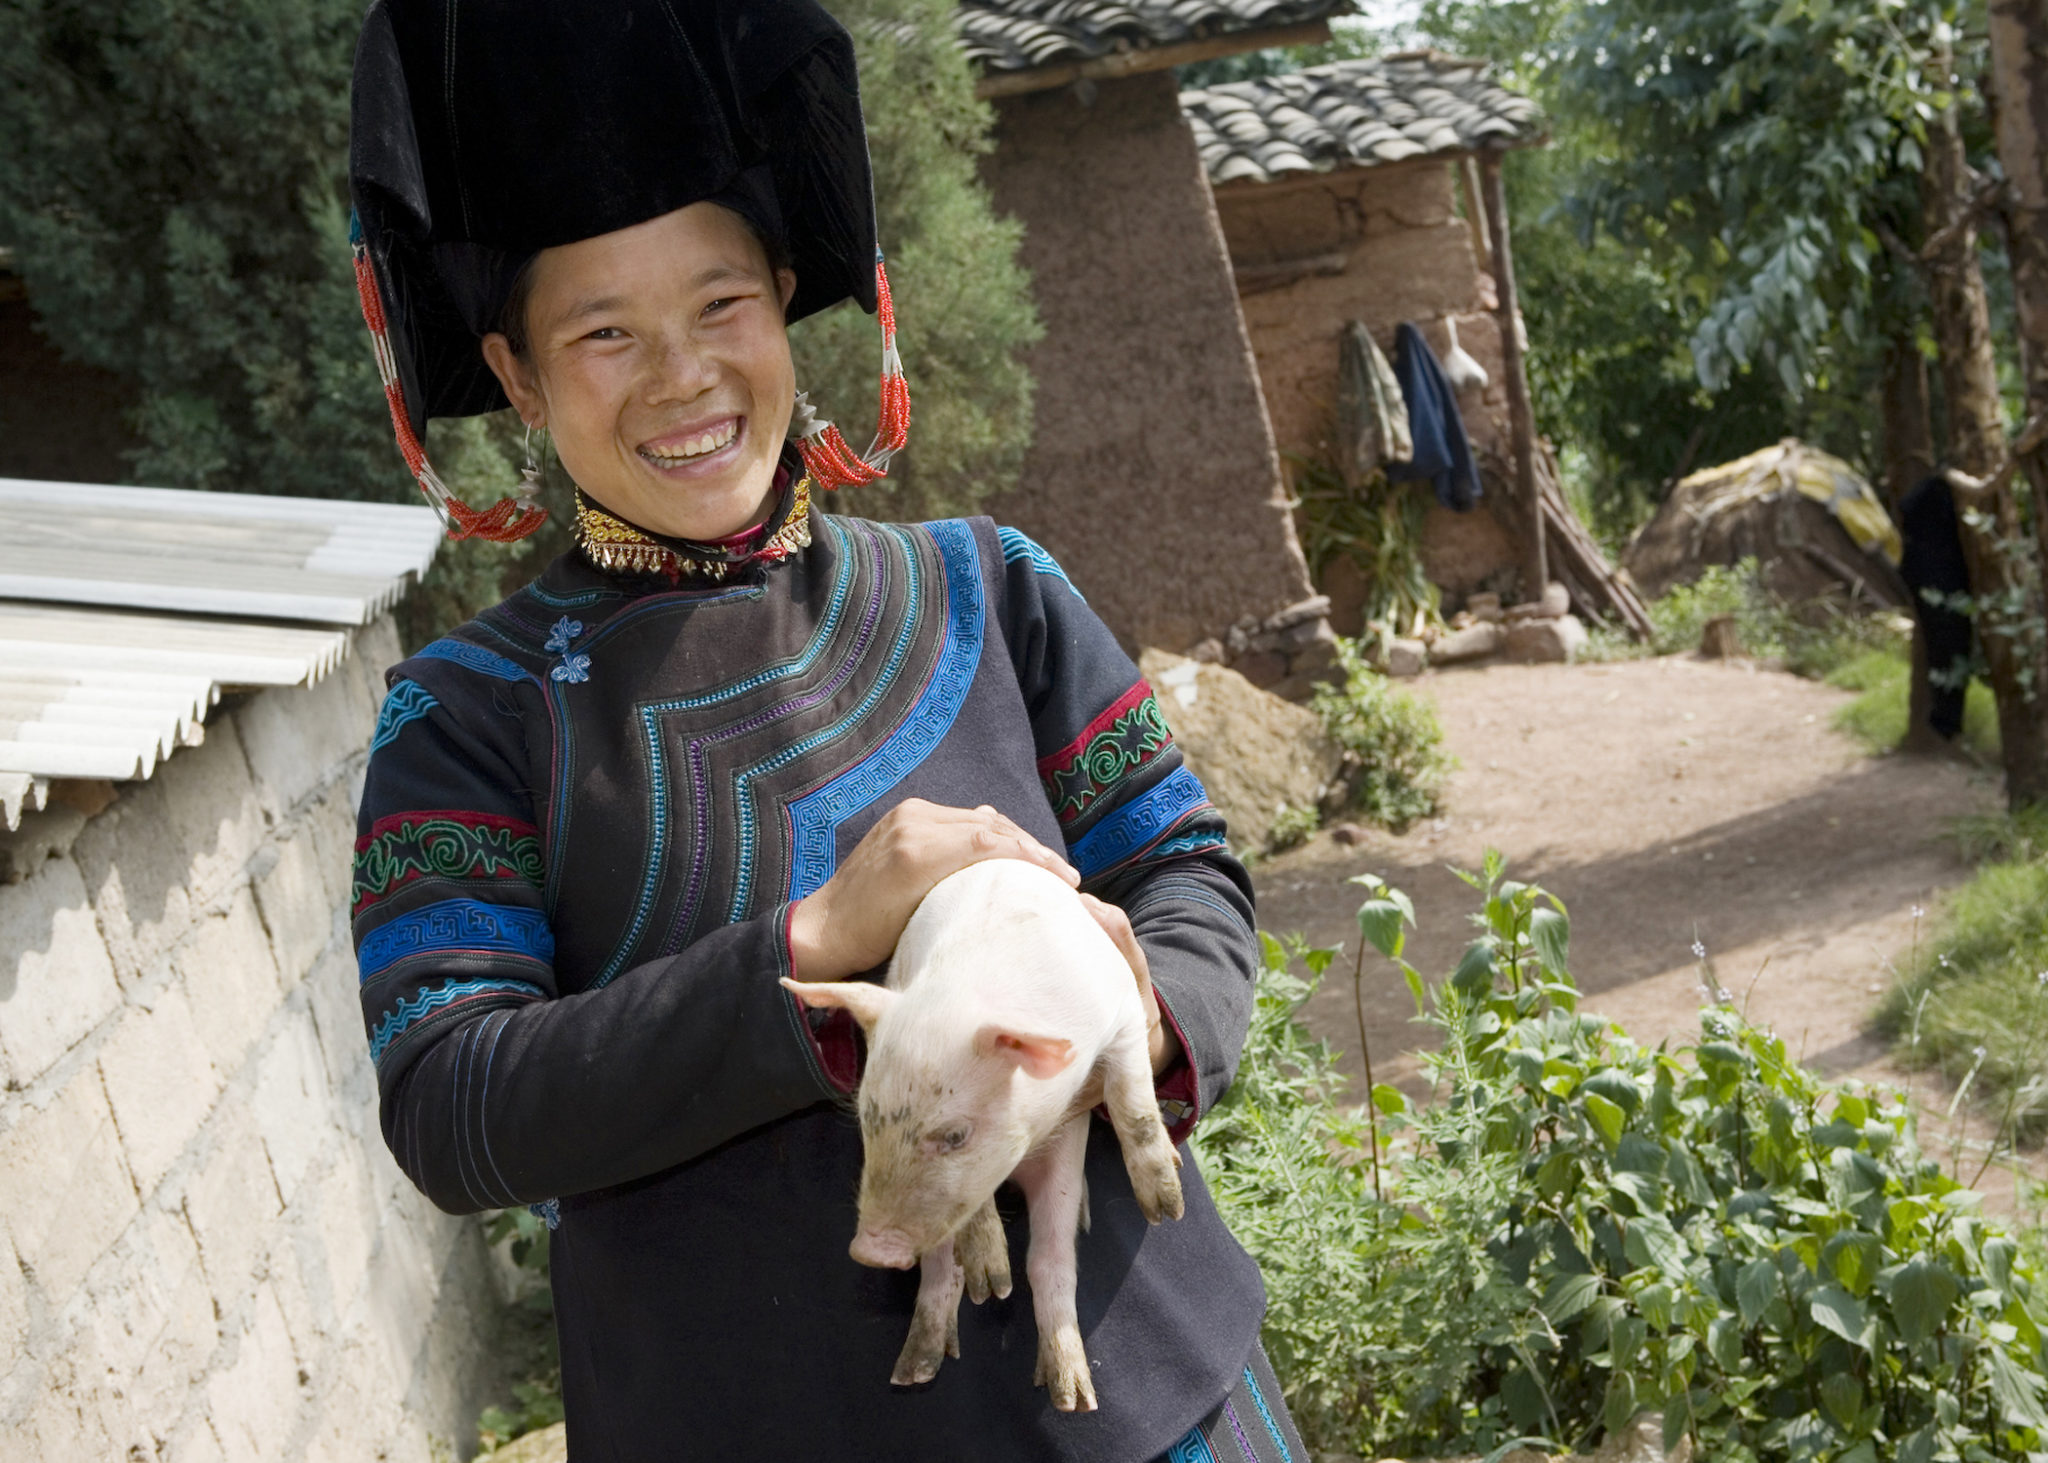 HEIFER HAS BEEN INVESTING IN WOMEN SMALLHOLDER FARMERS FOR OVER 20 YEARS NOW.